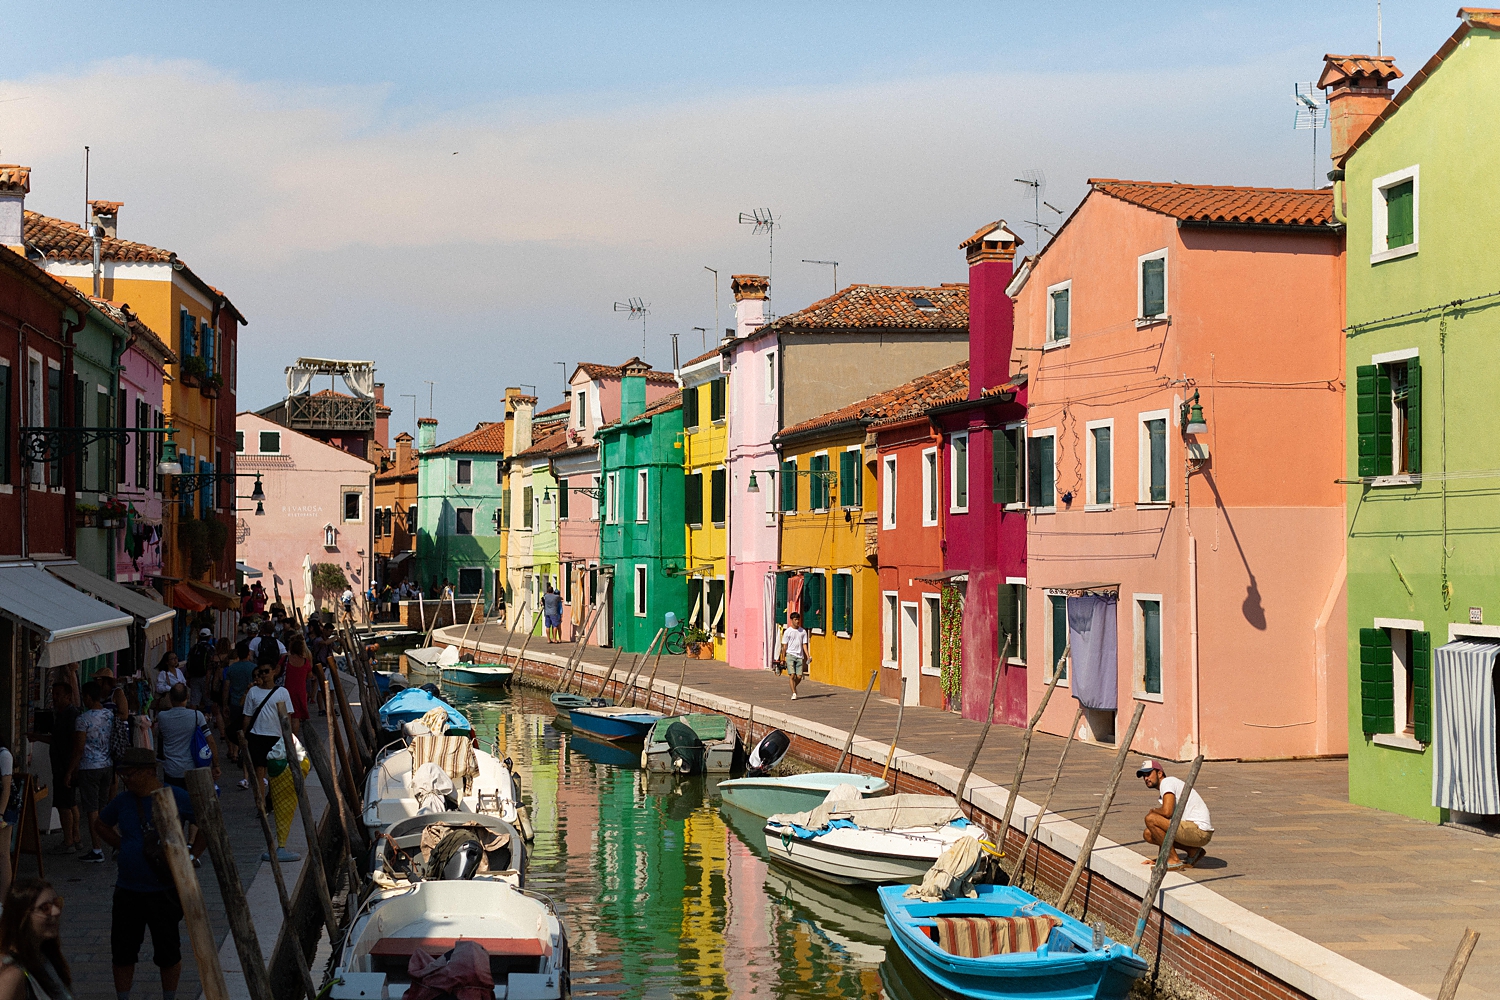 Canal and colorful street scene in Burano, Italy against blue sky